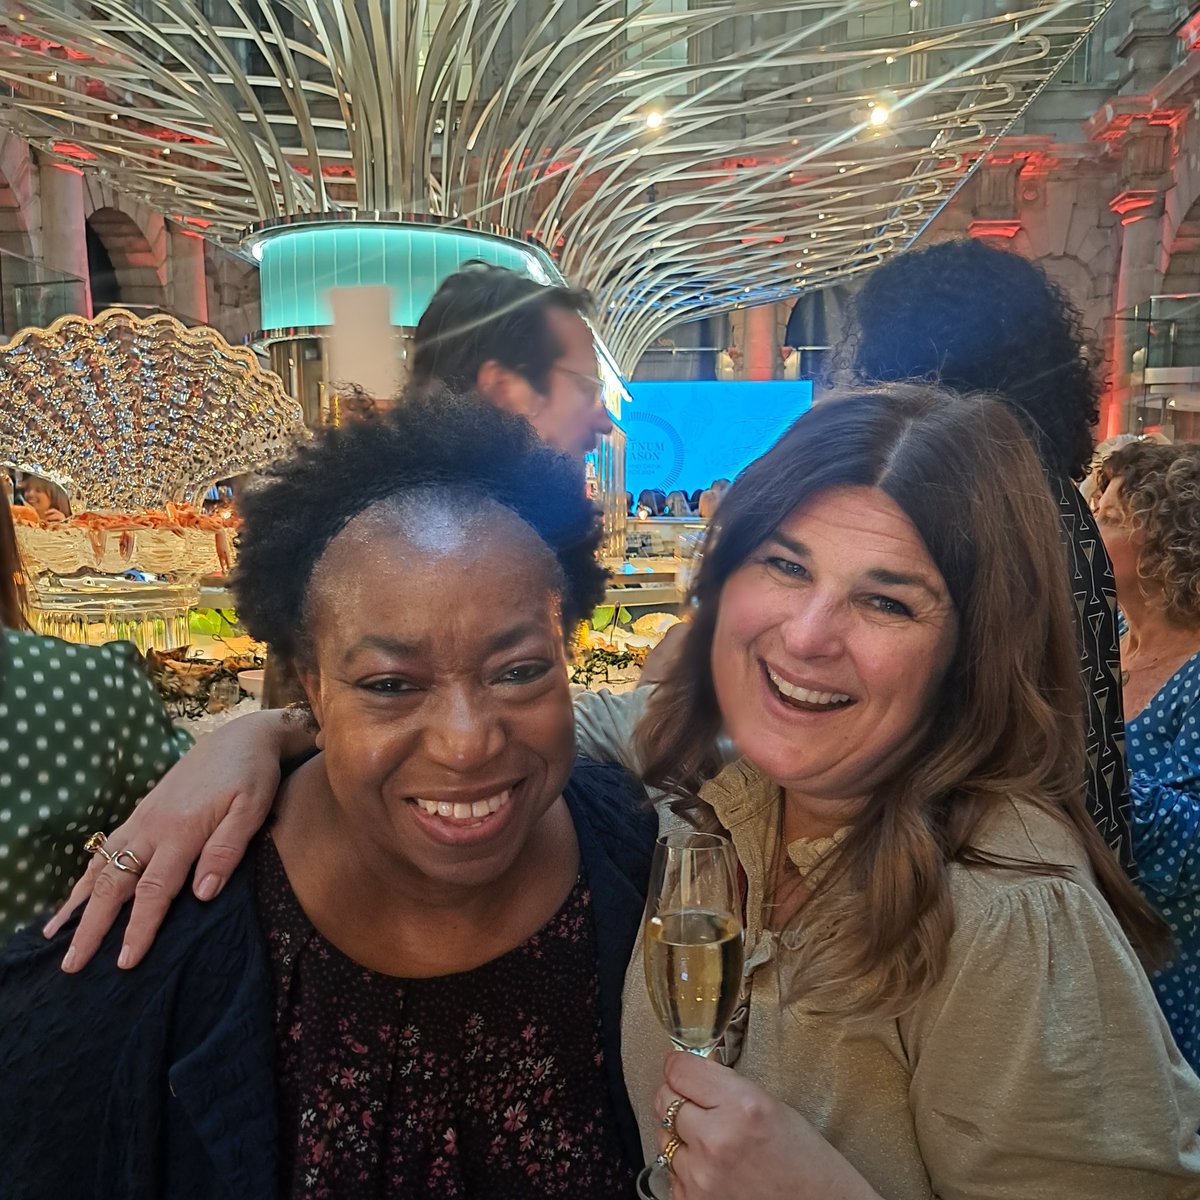 Plus the amazing @knackeredmutha Our co-founder is a big fan @SaturdayKitchen ##SaturdayKitchen Fun at @Fortnums ##FandMAwards